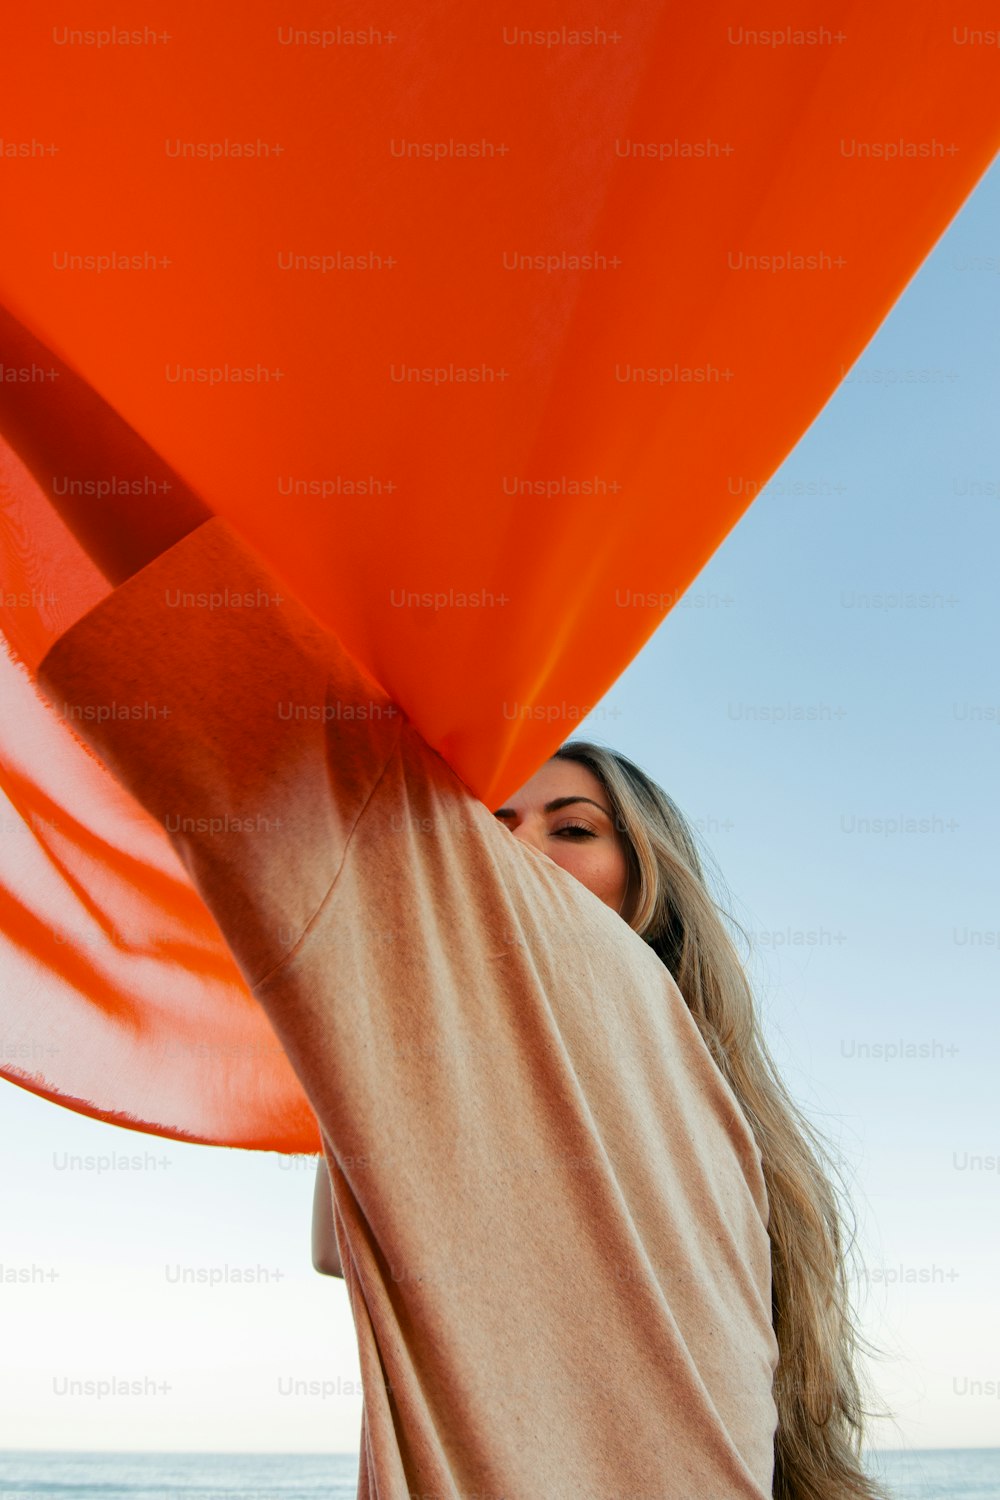 a woman holding a large orange umbrella over her head